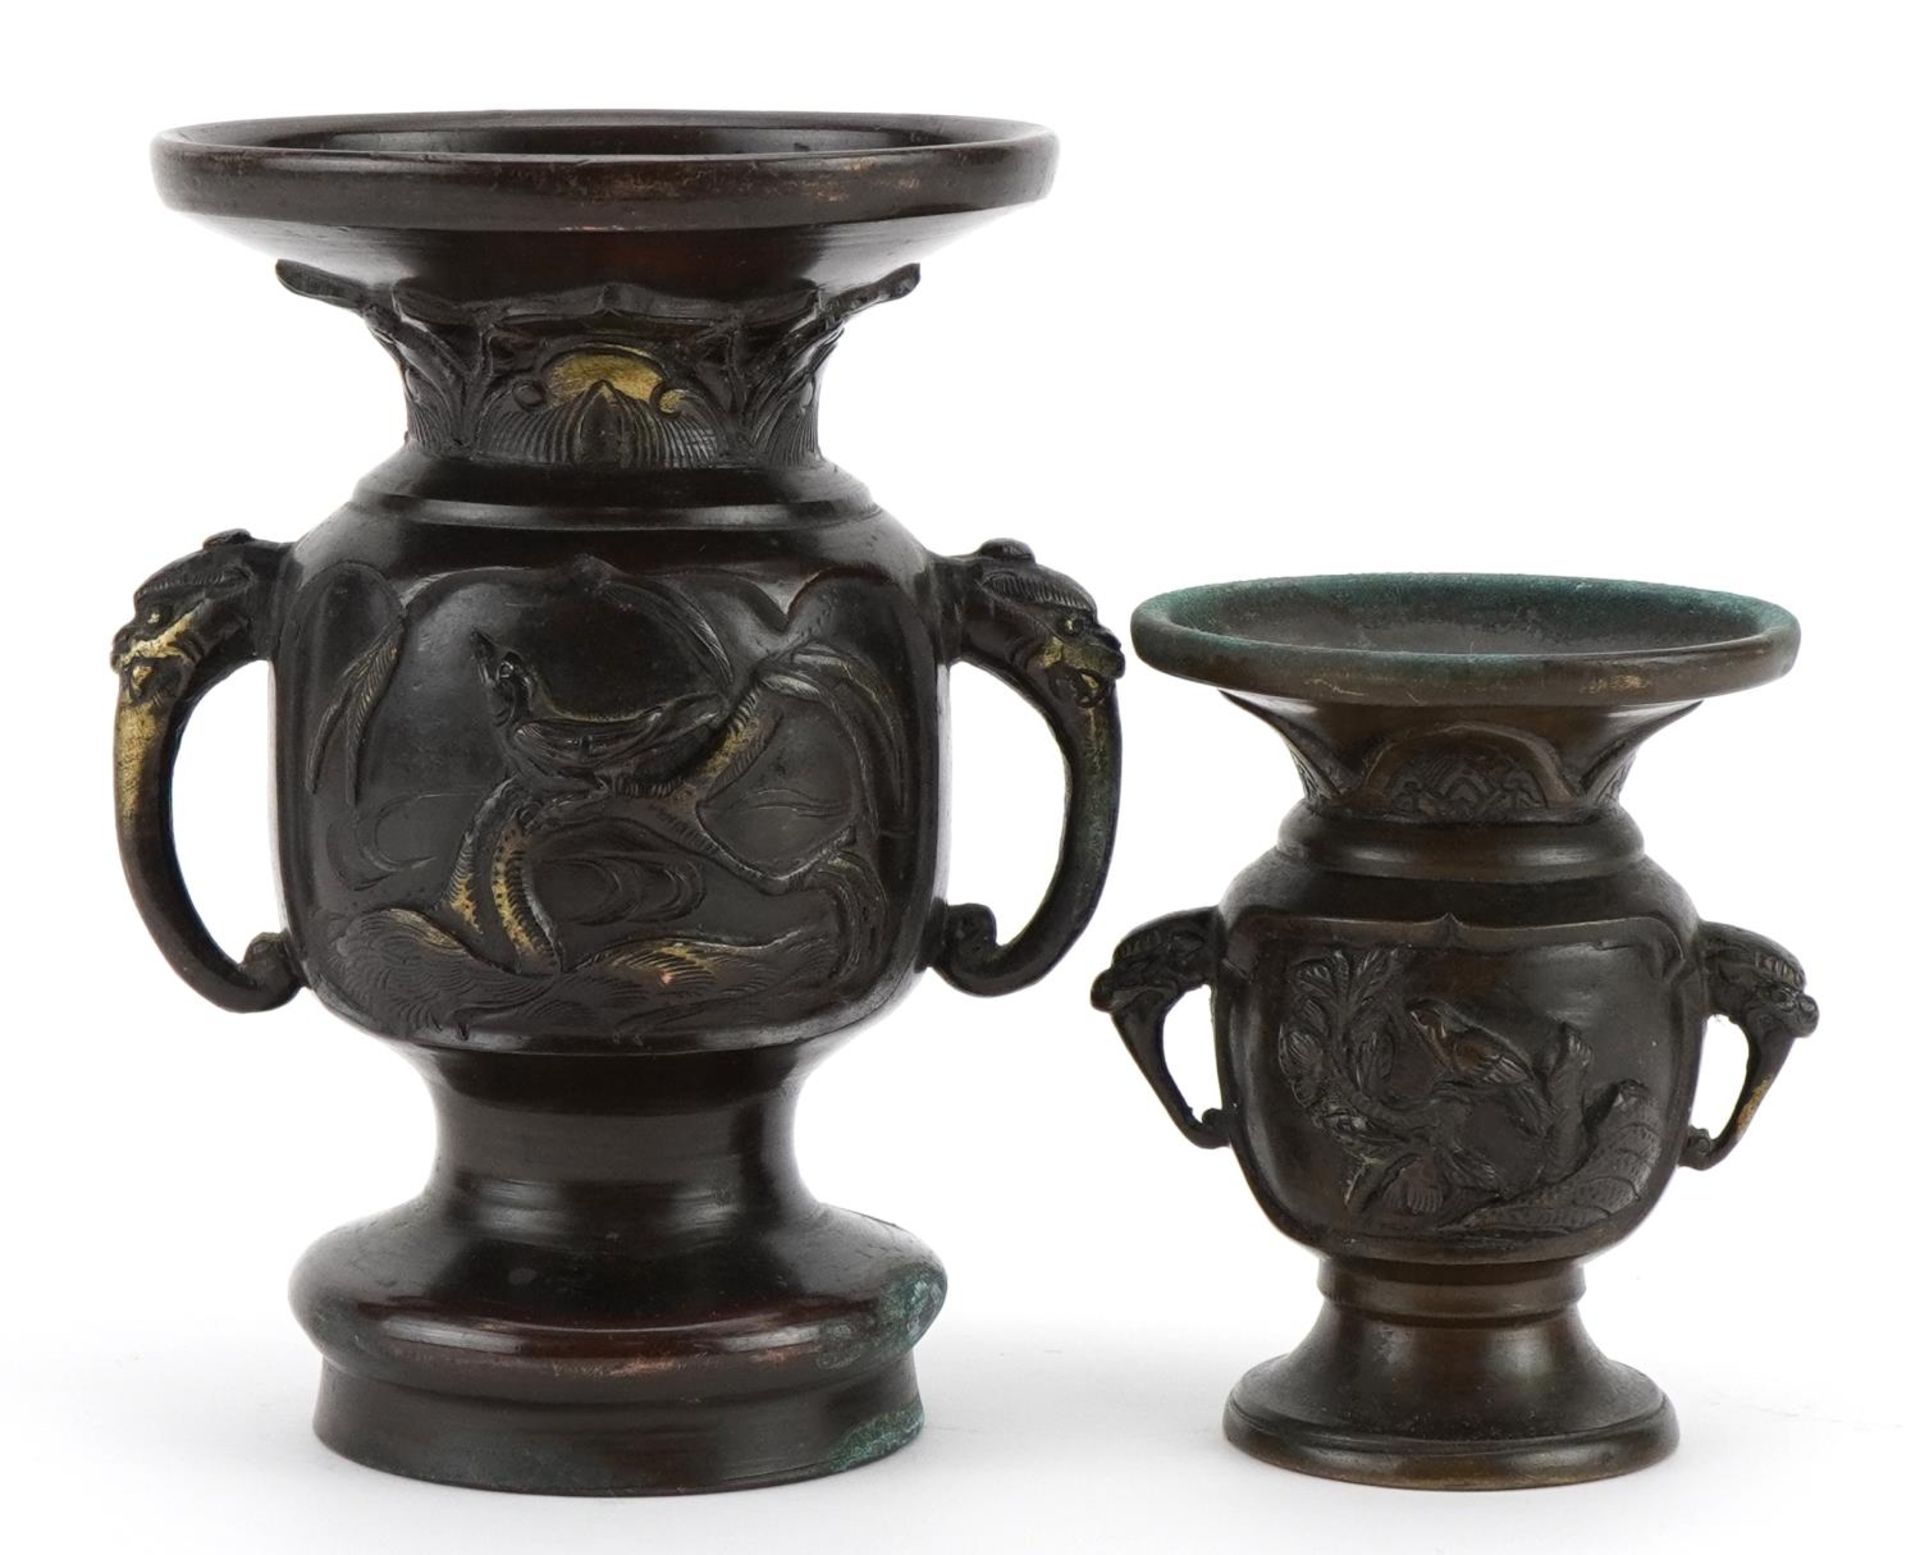 Two Japanese bronze vases, each with twin elephant head handles and decorated in relief with birds - Image 2 of 3